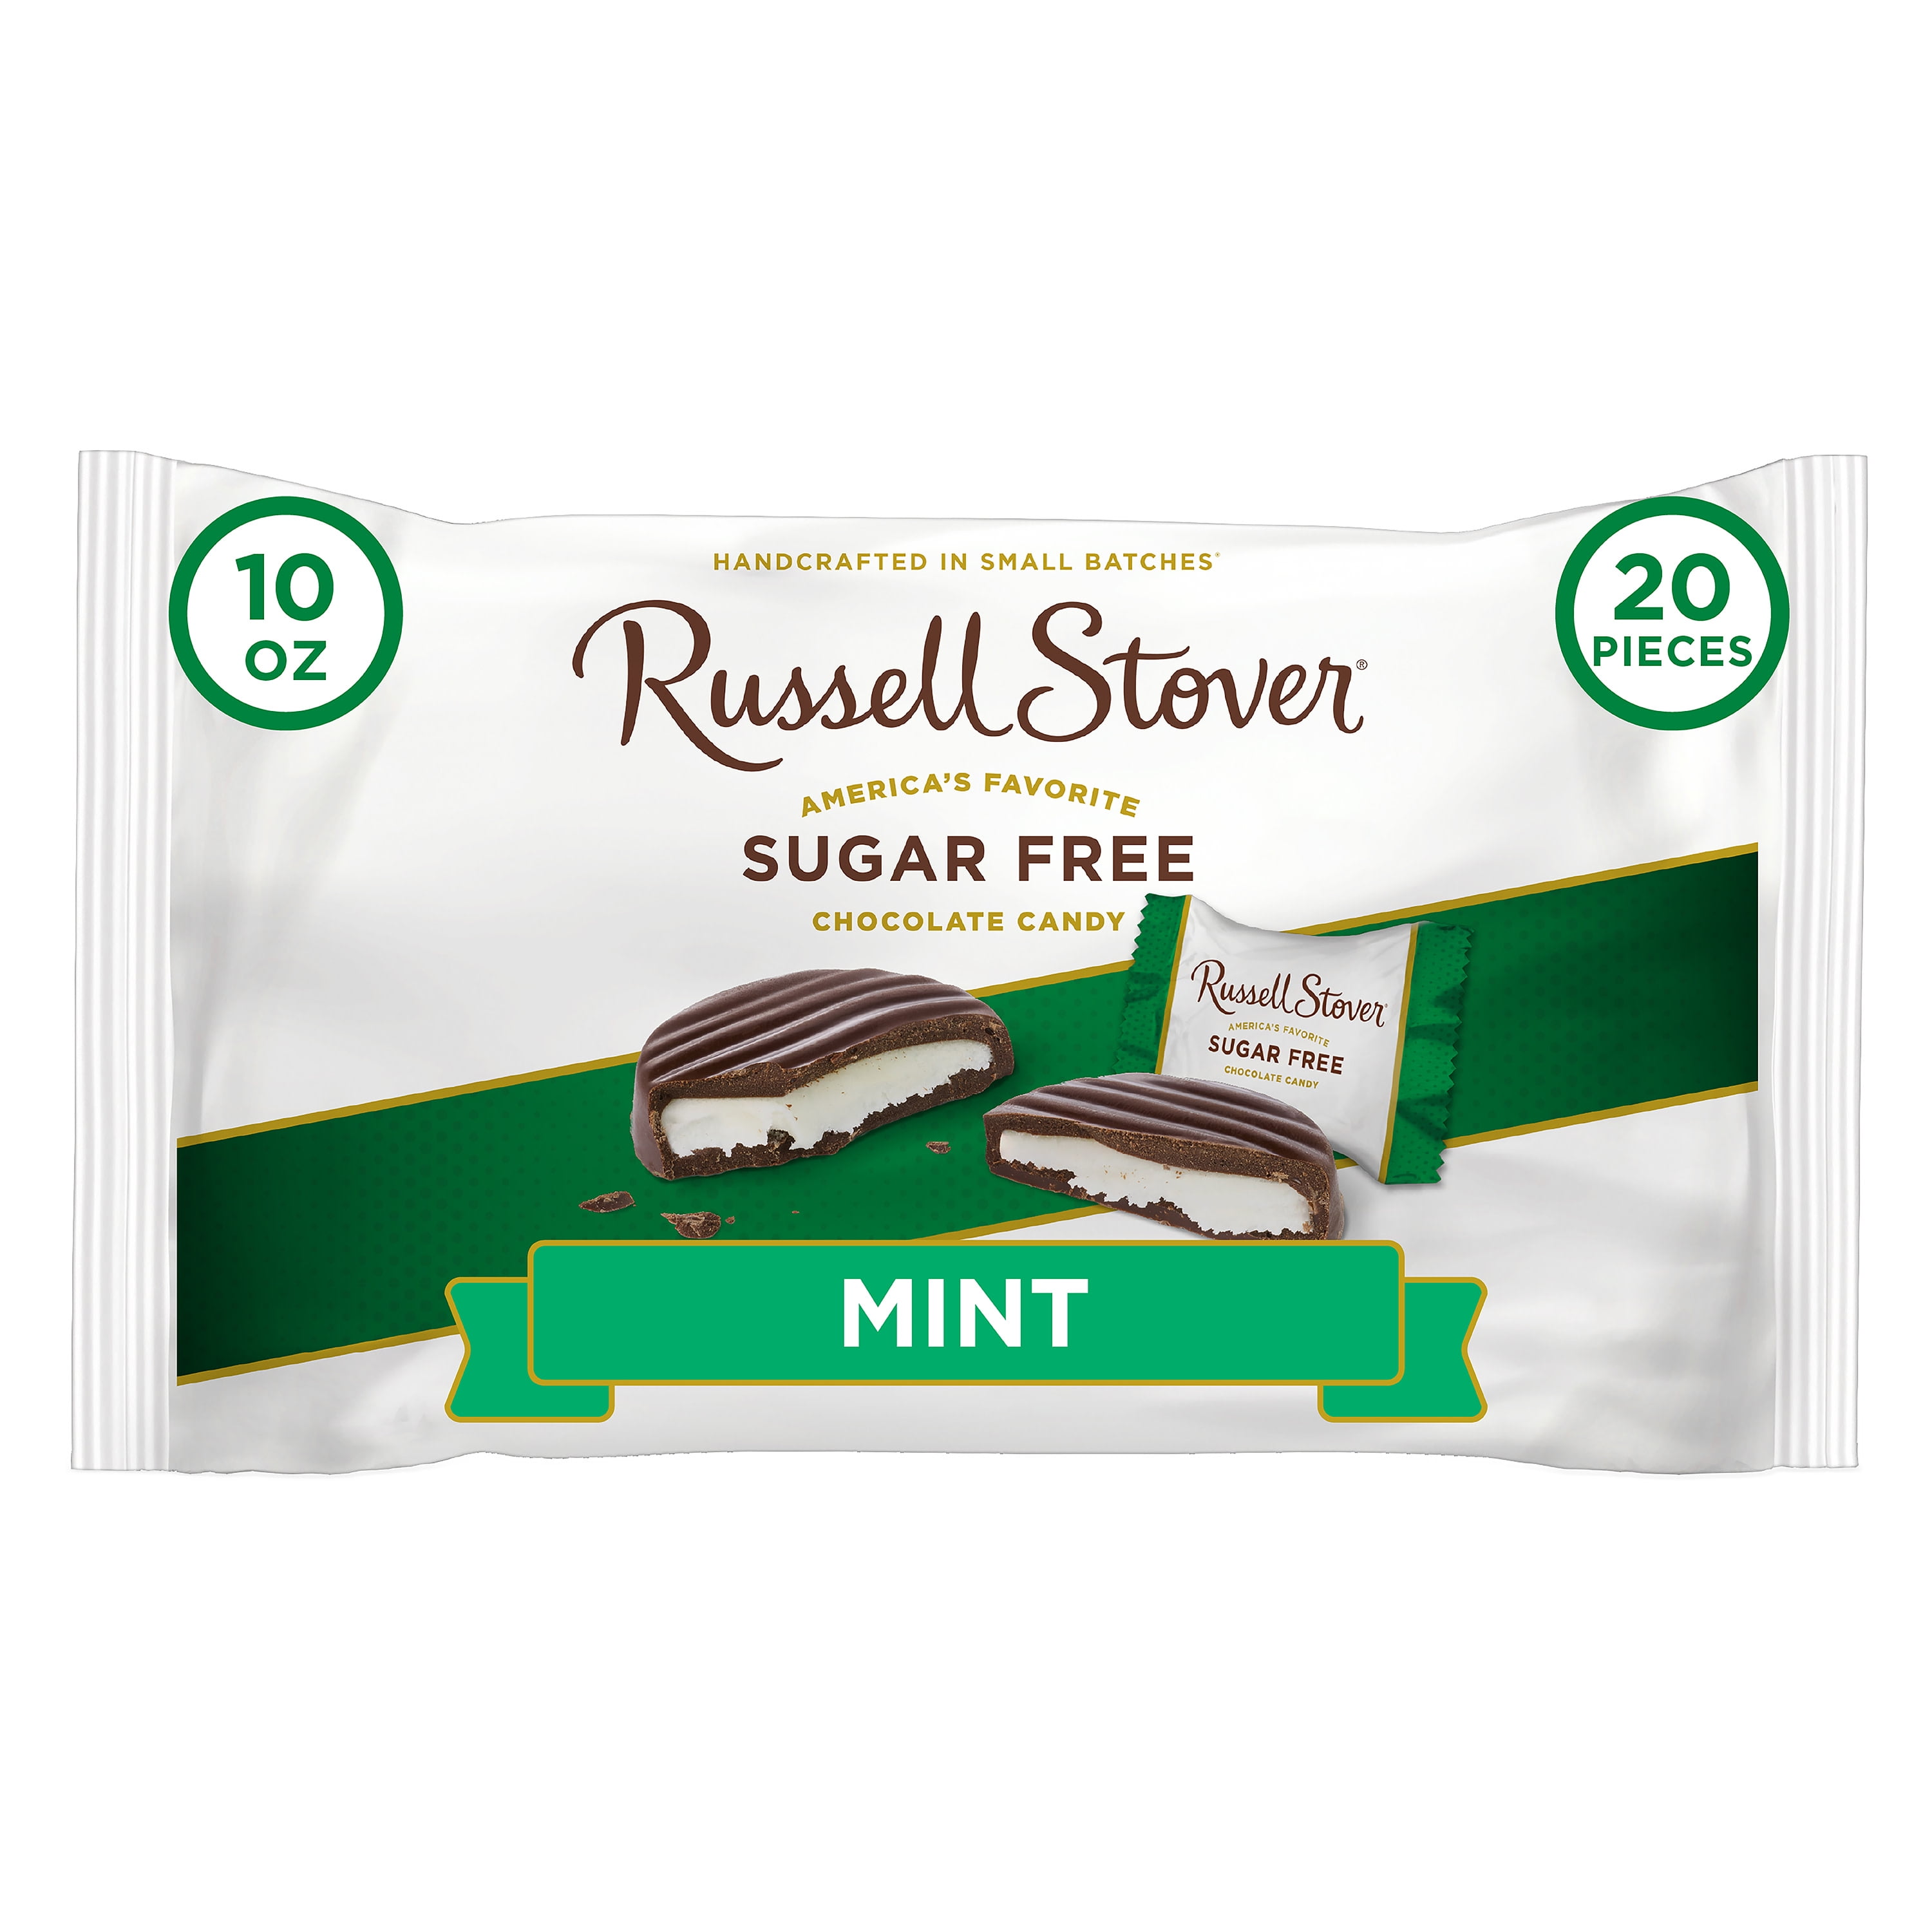 Russell Stover Sugar-Free Mint Patties, 10 oz., 20 Ct